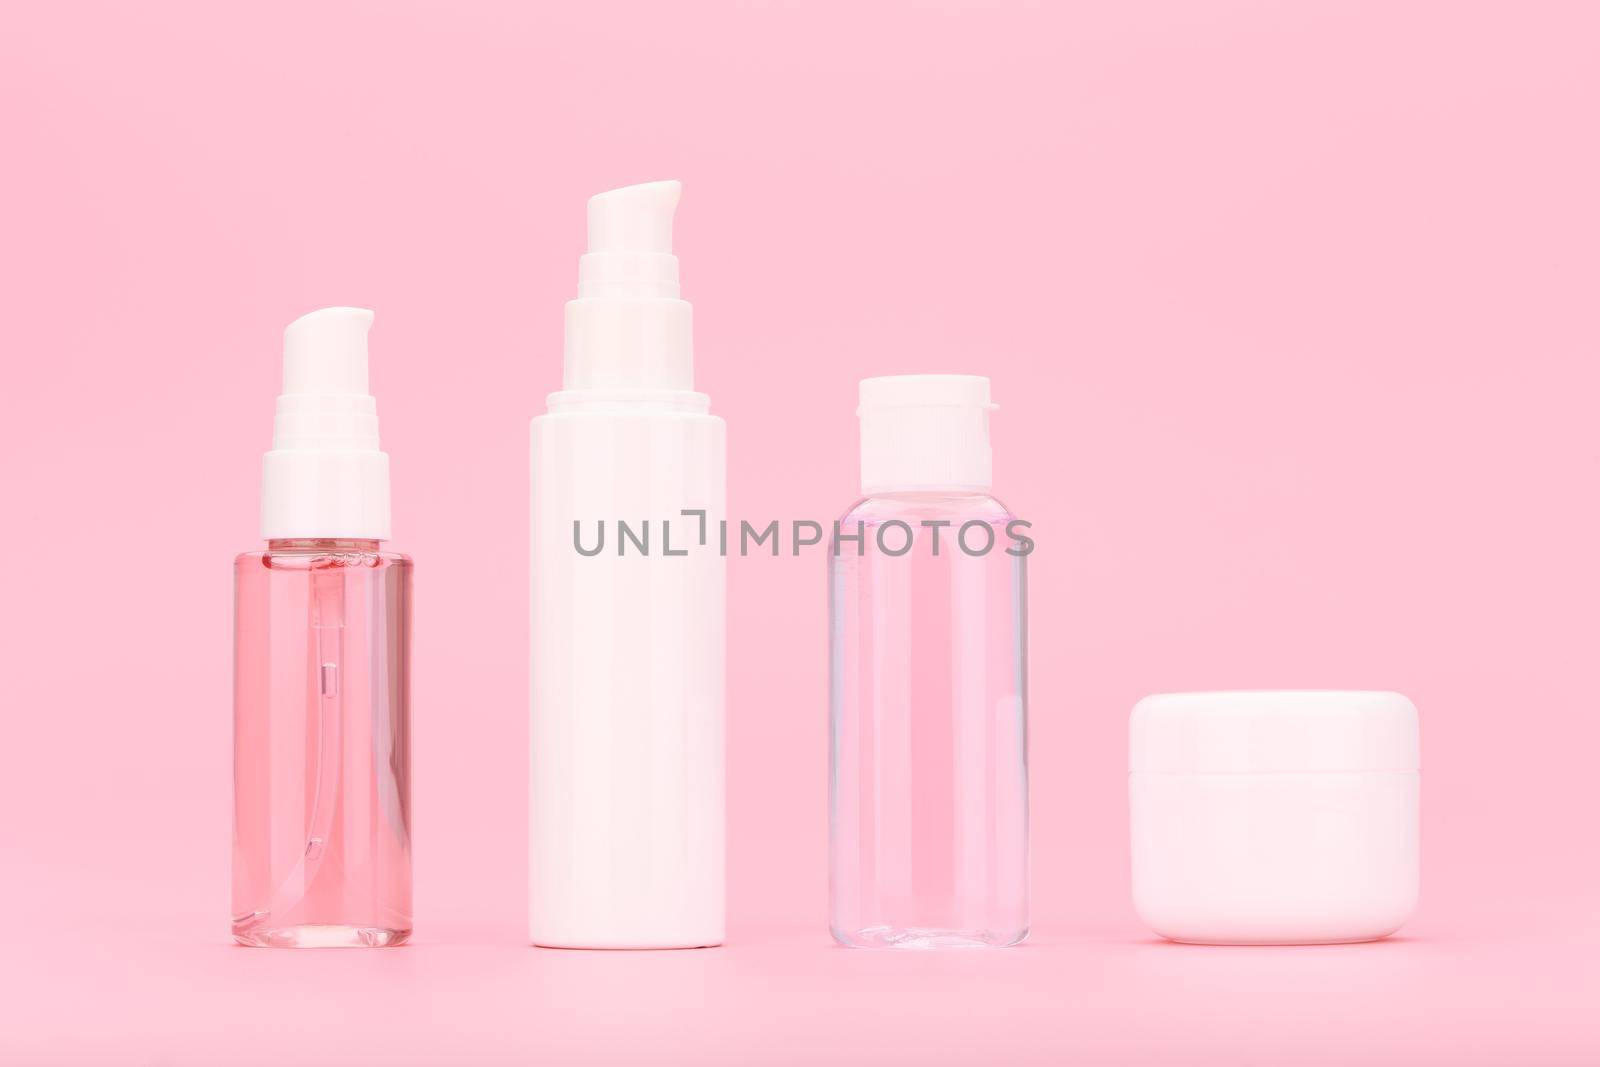 Minimalistic still life with set of unbranded cosmetic bottles with cleansing gel, face cream, lotion and under eye cream against bright pink background